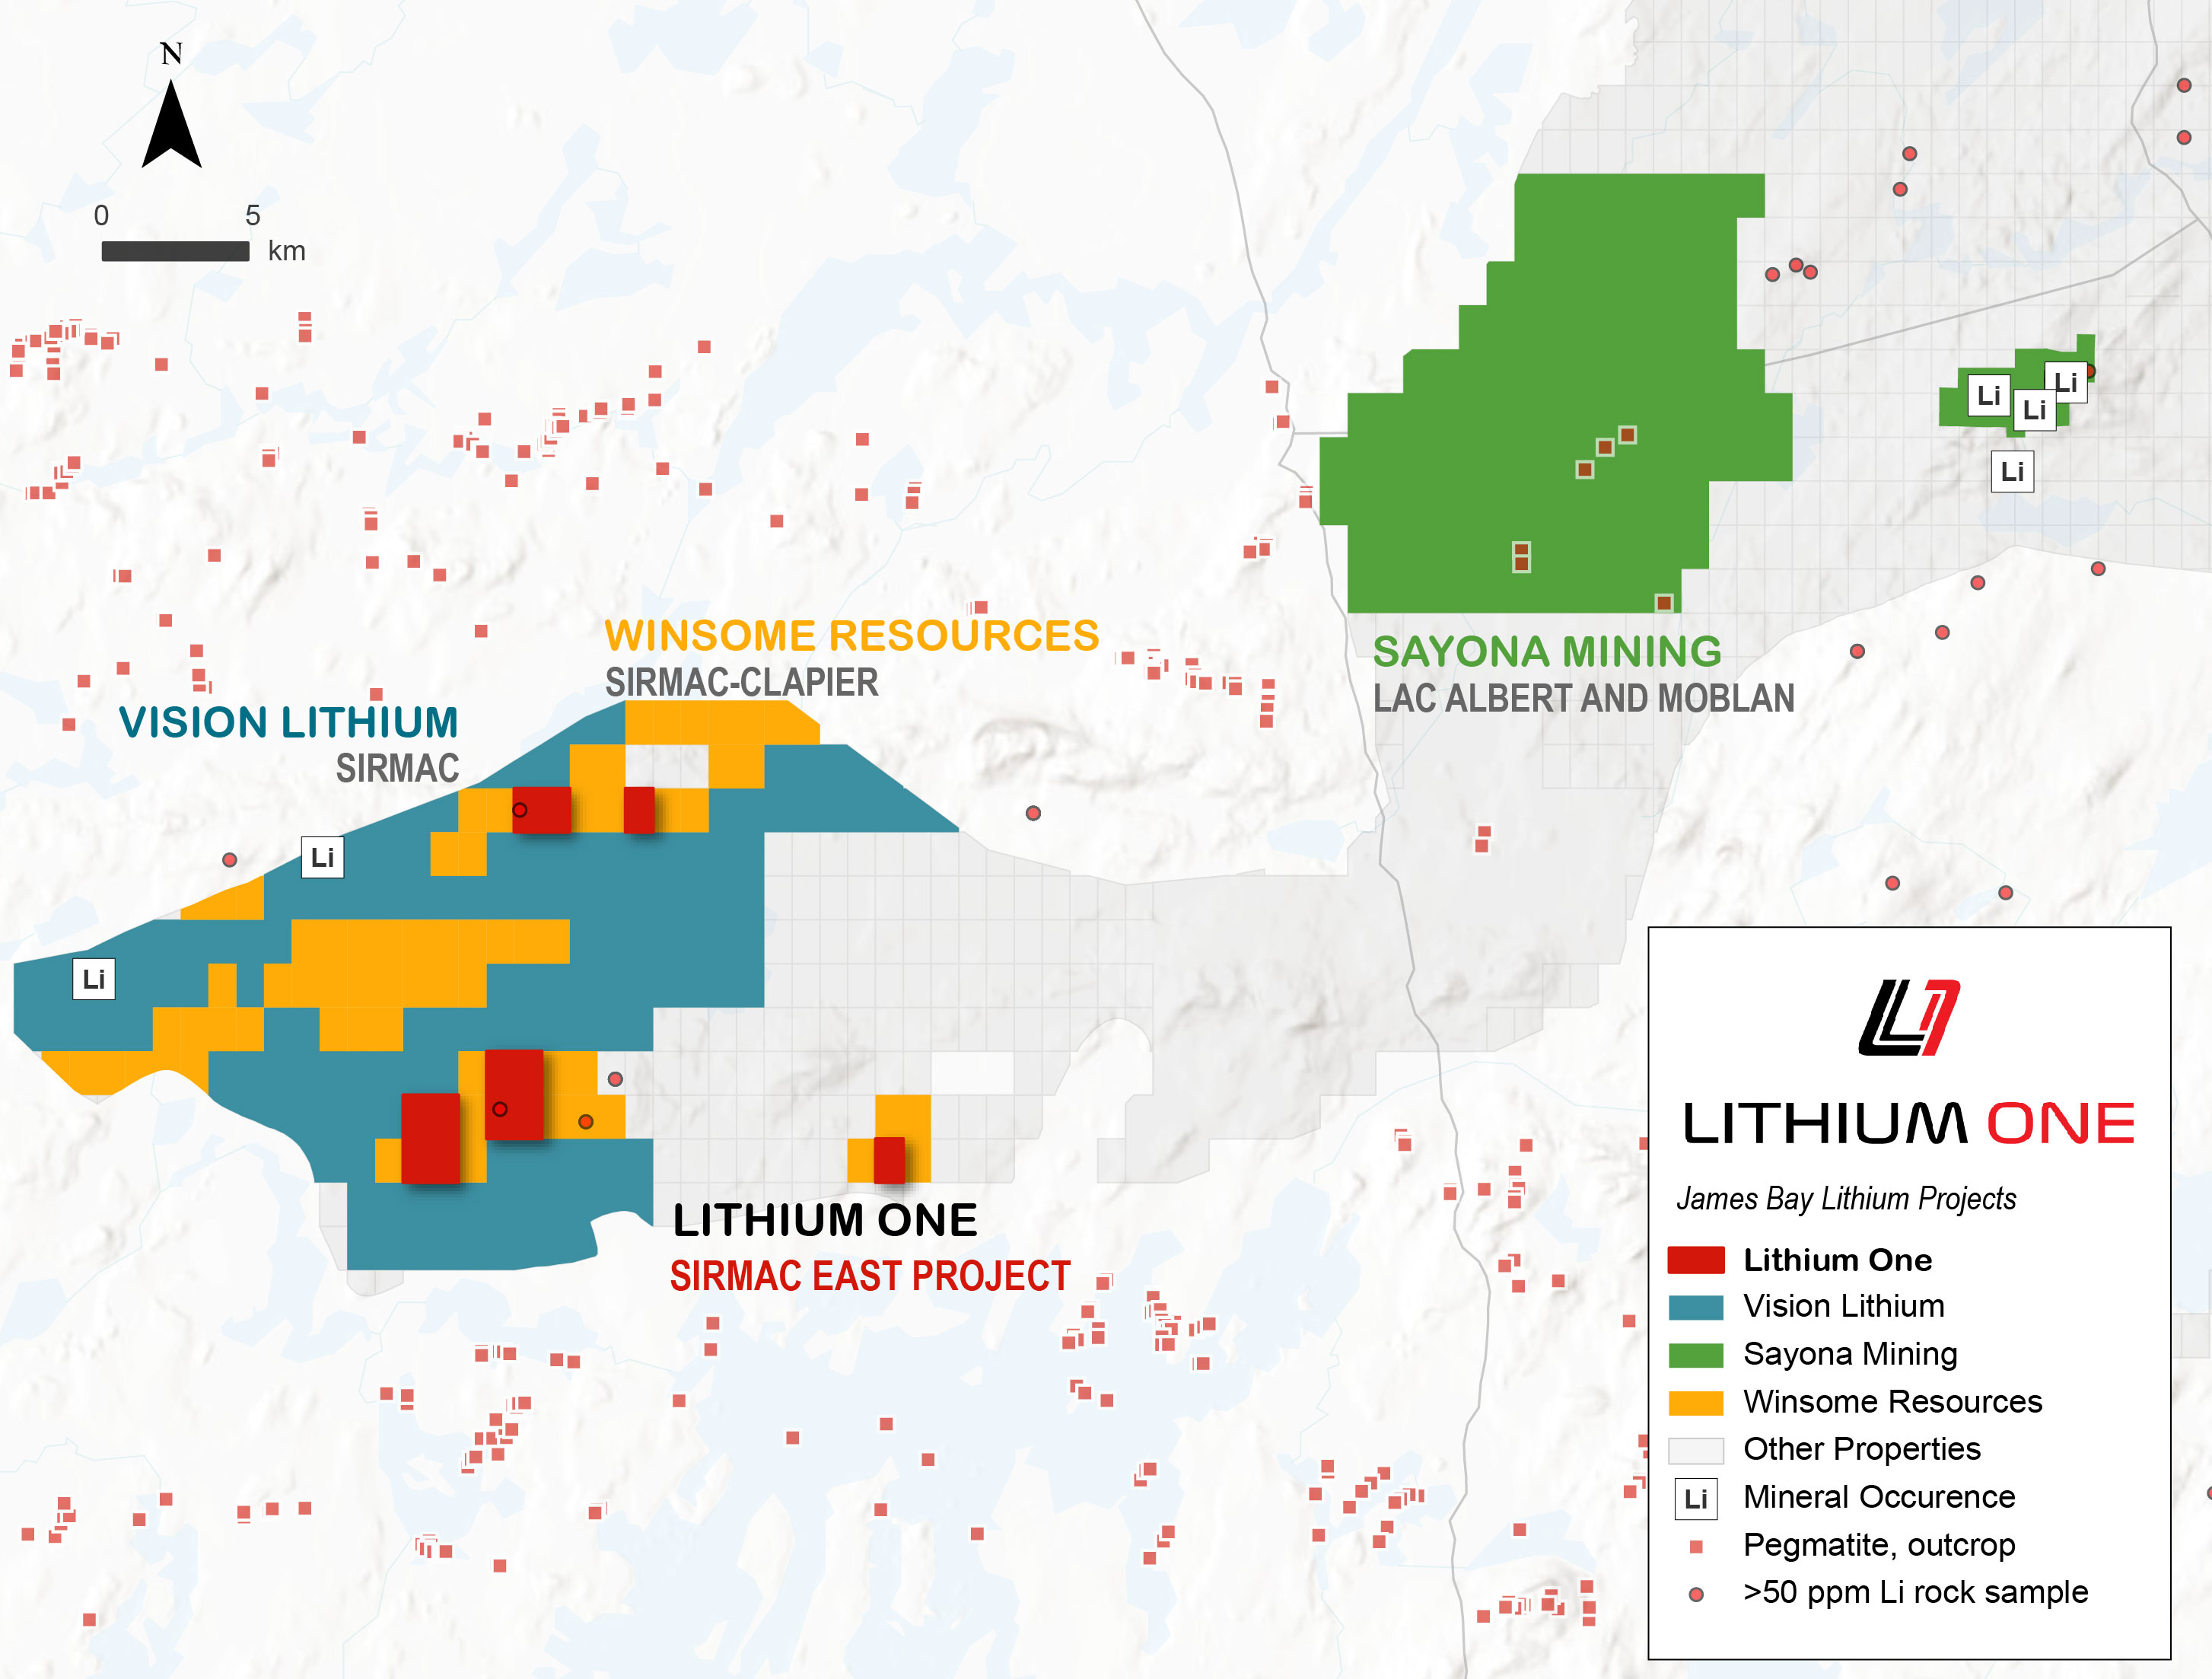 Lithium One’s Sirmac East property with Vision Lithium and Troilus Gold projects in the James Bay region of Quebec.